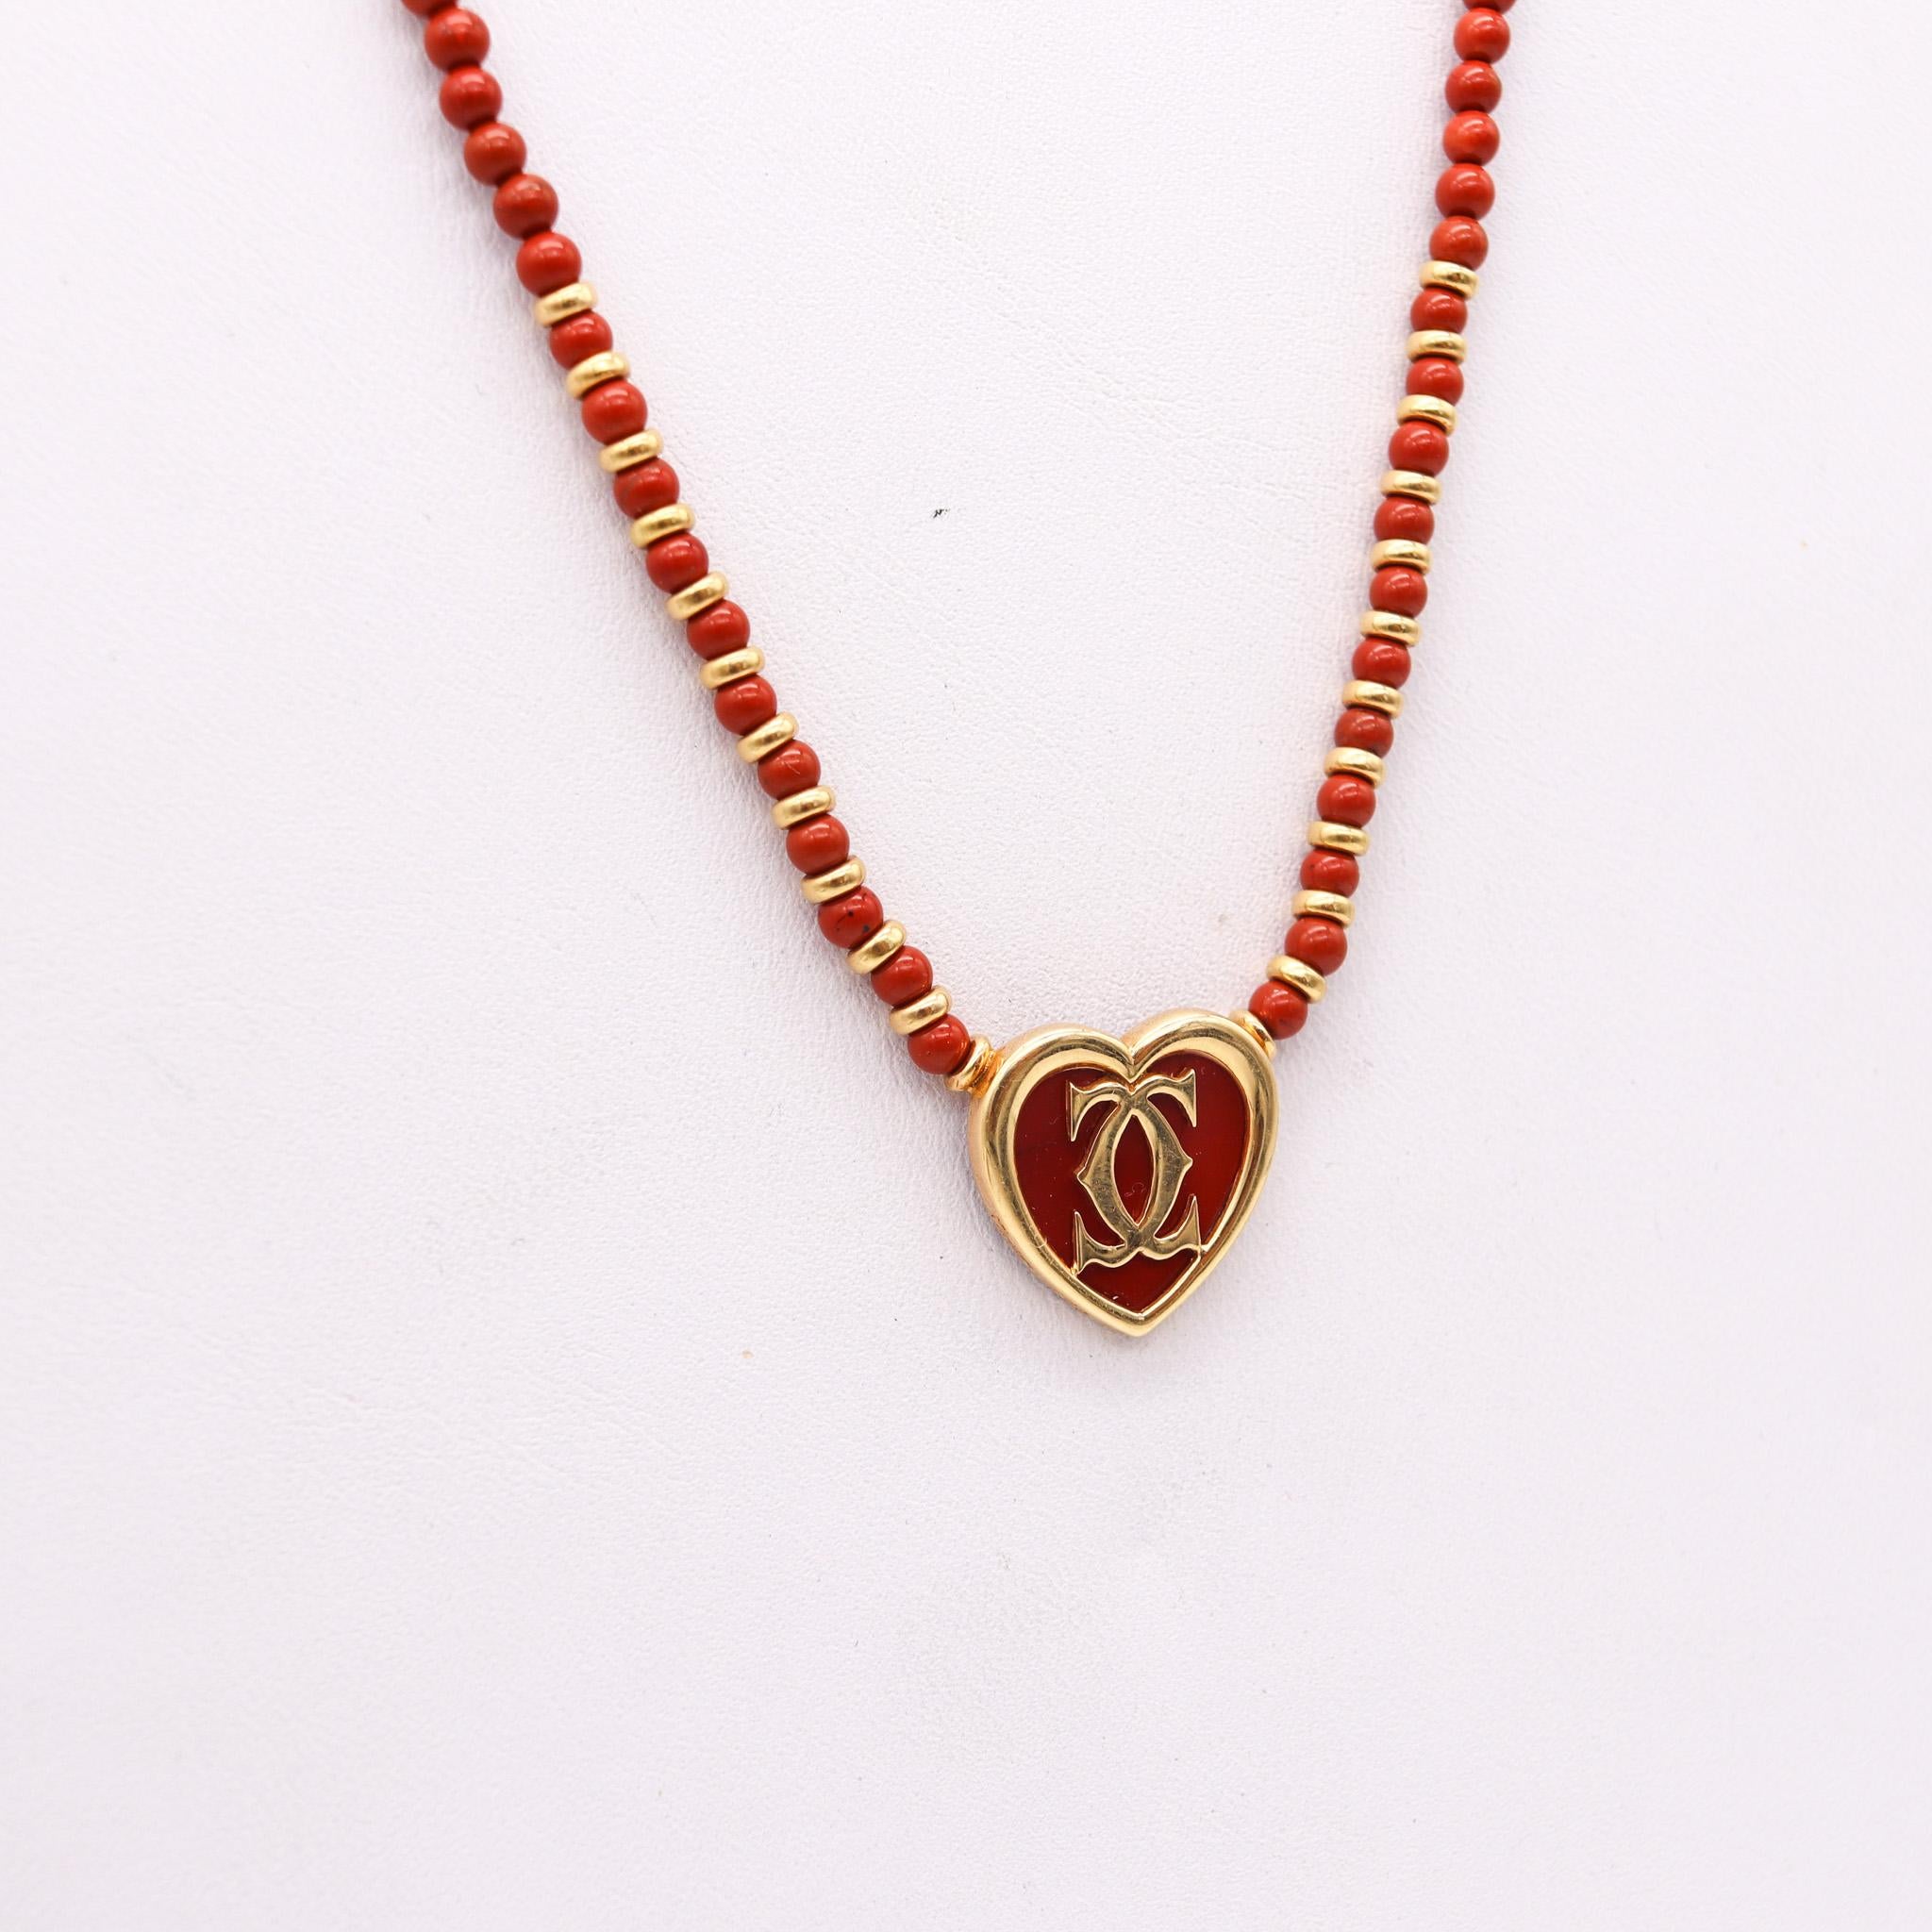 A heart necklace designed by Cartier.

Beautiful contemporary heart necklace, created in Paris France by the jewelry house of Cartier. Crafted with parts made in solid yellow gold of 18 karats and carved pieces from red jasper. Fitted with a crab